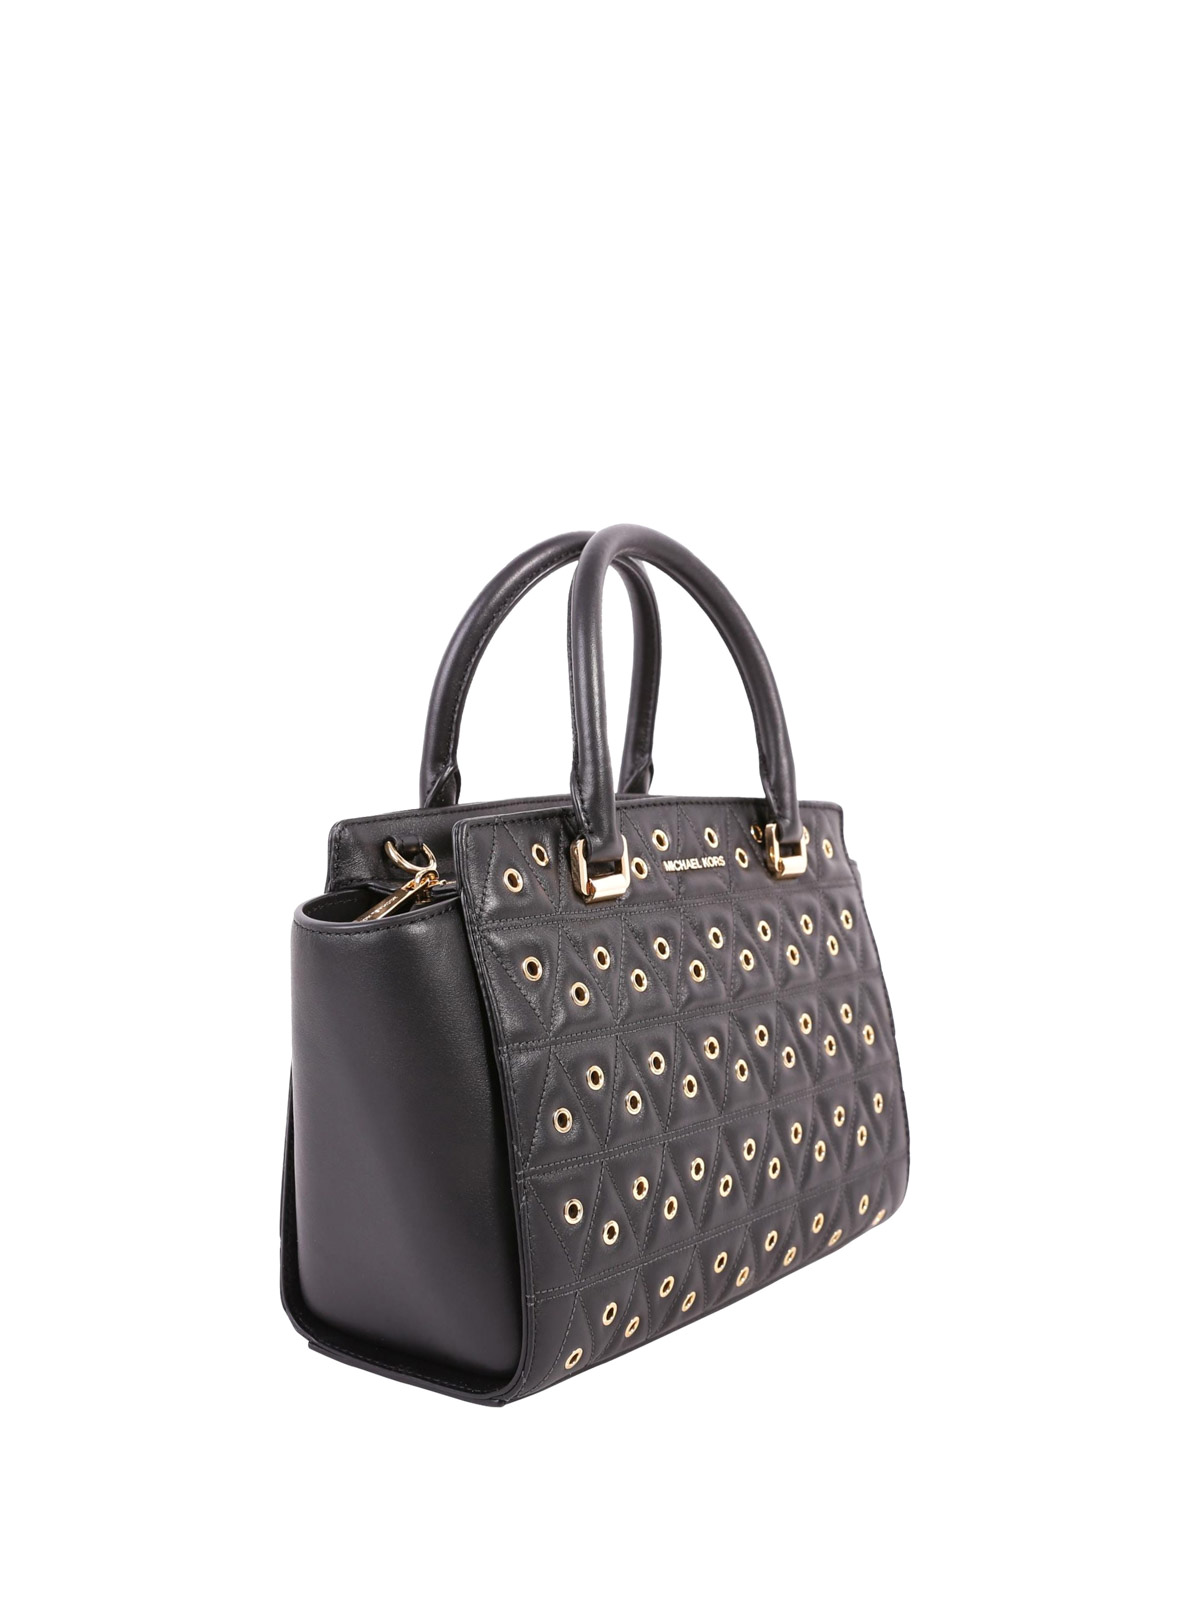 michael kors quilted tote bag